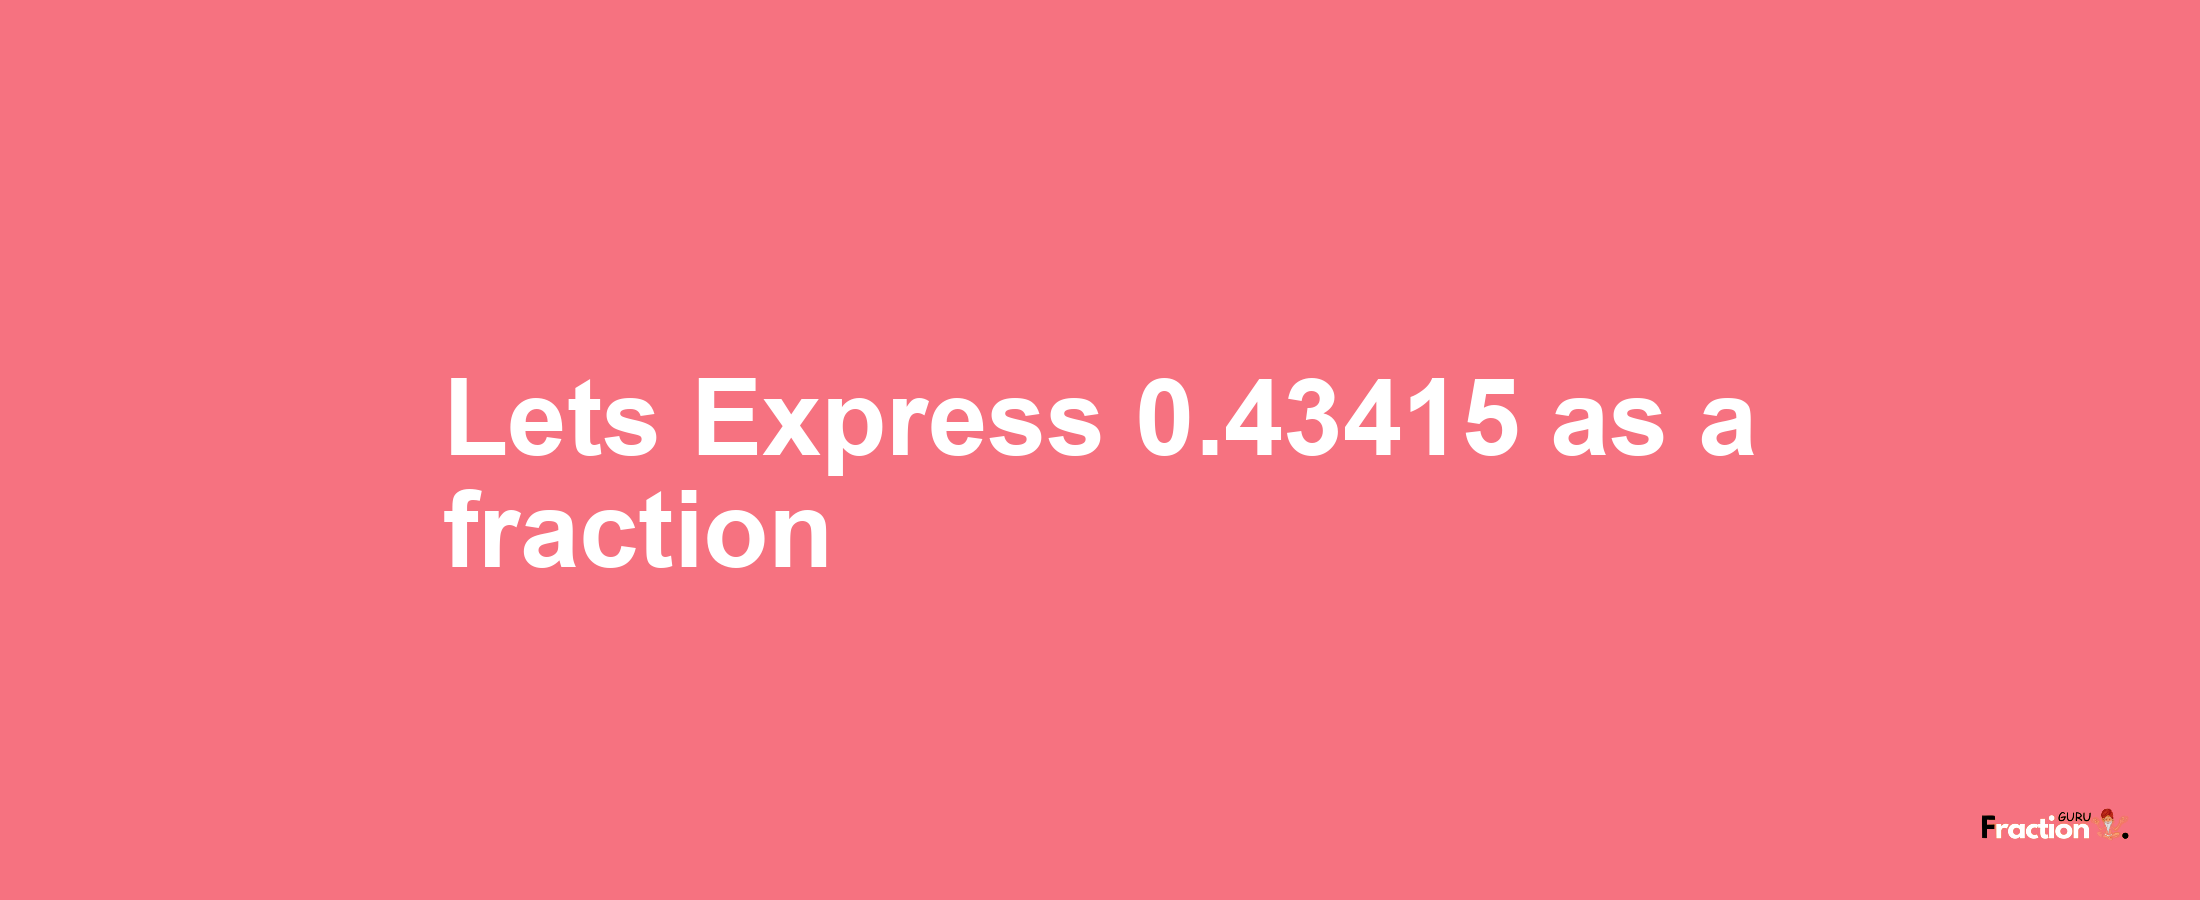 Lets Express 0.43415 as afraction